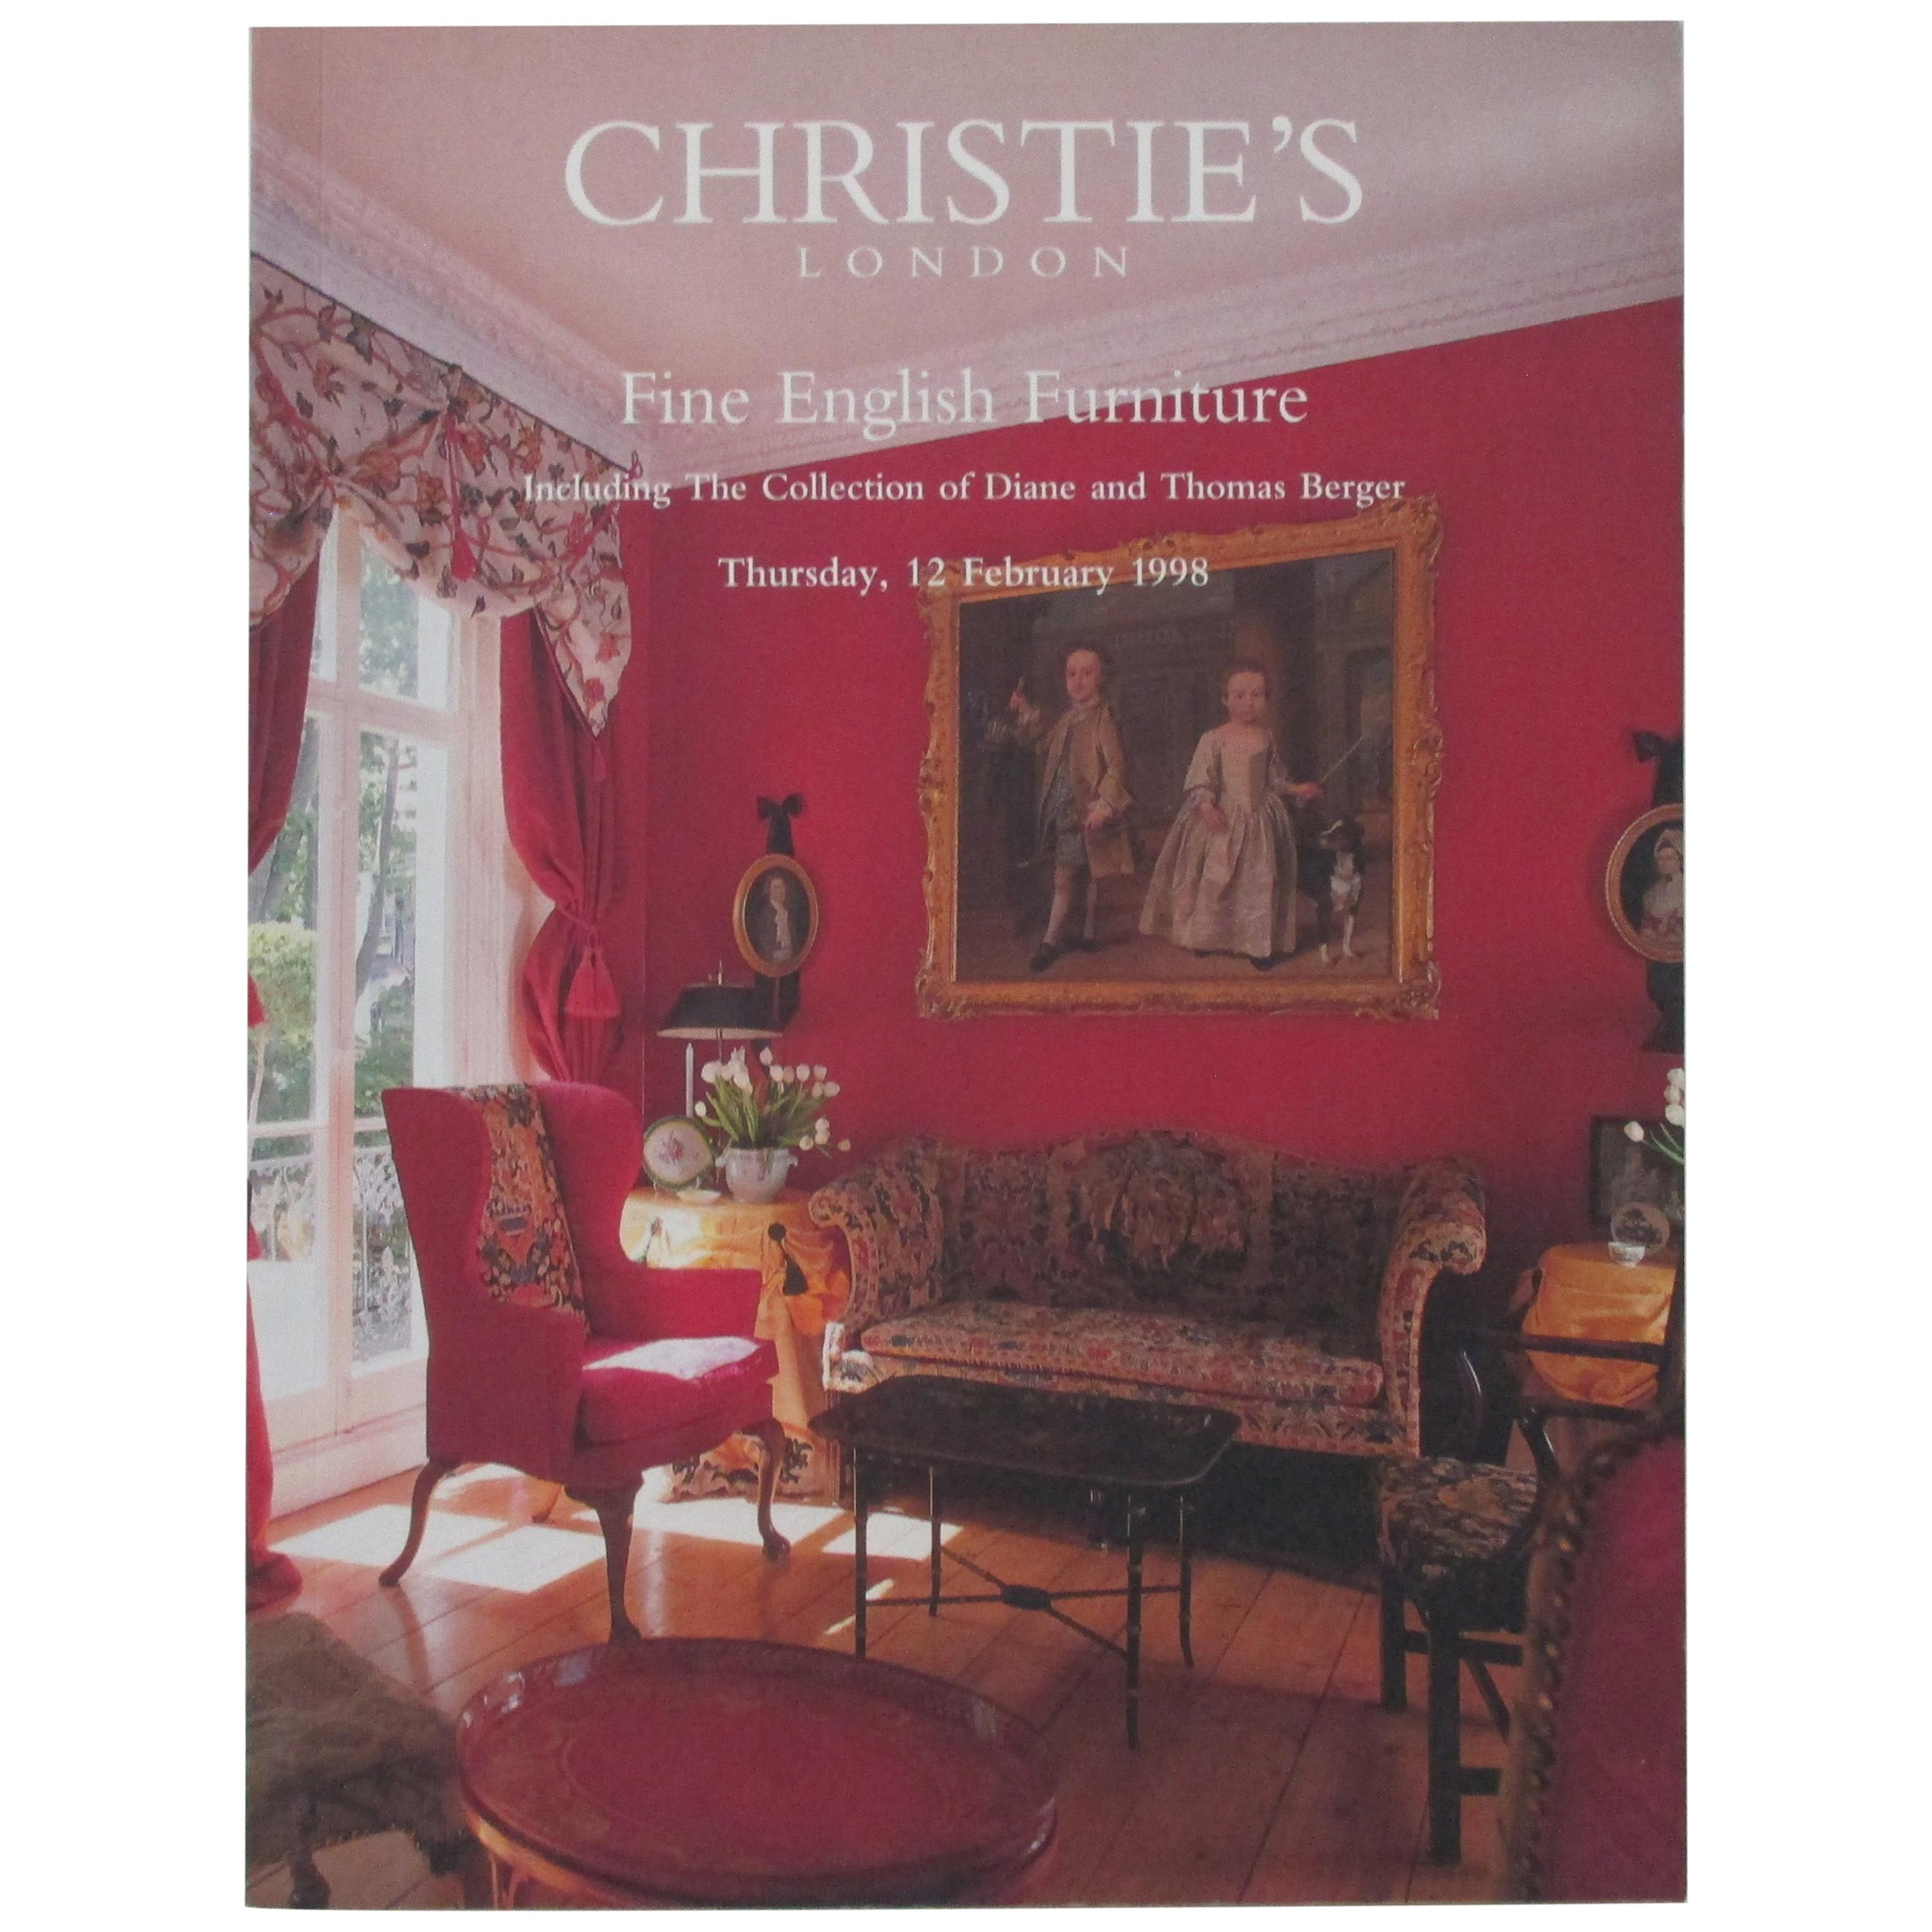 Christie's Fine English Furniture with The Collection of Diane and Thomas Berger